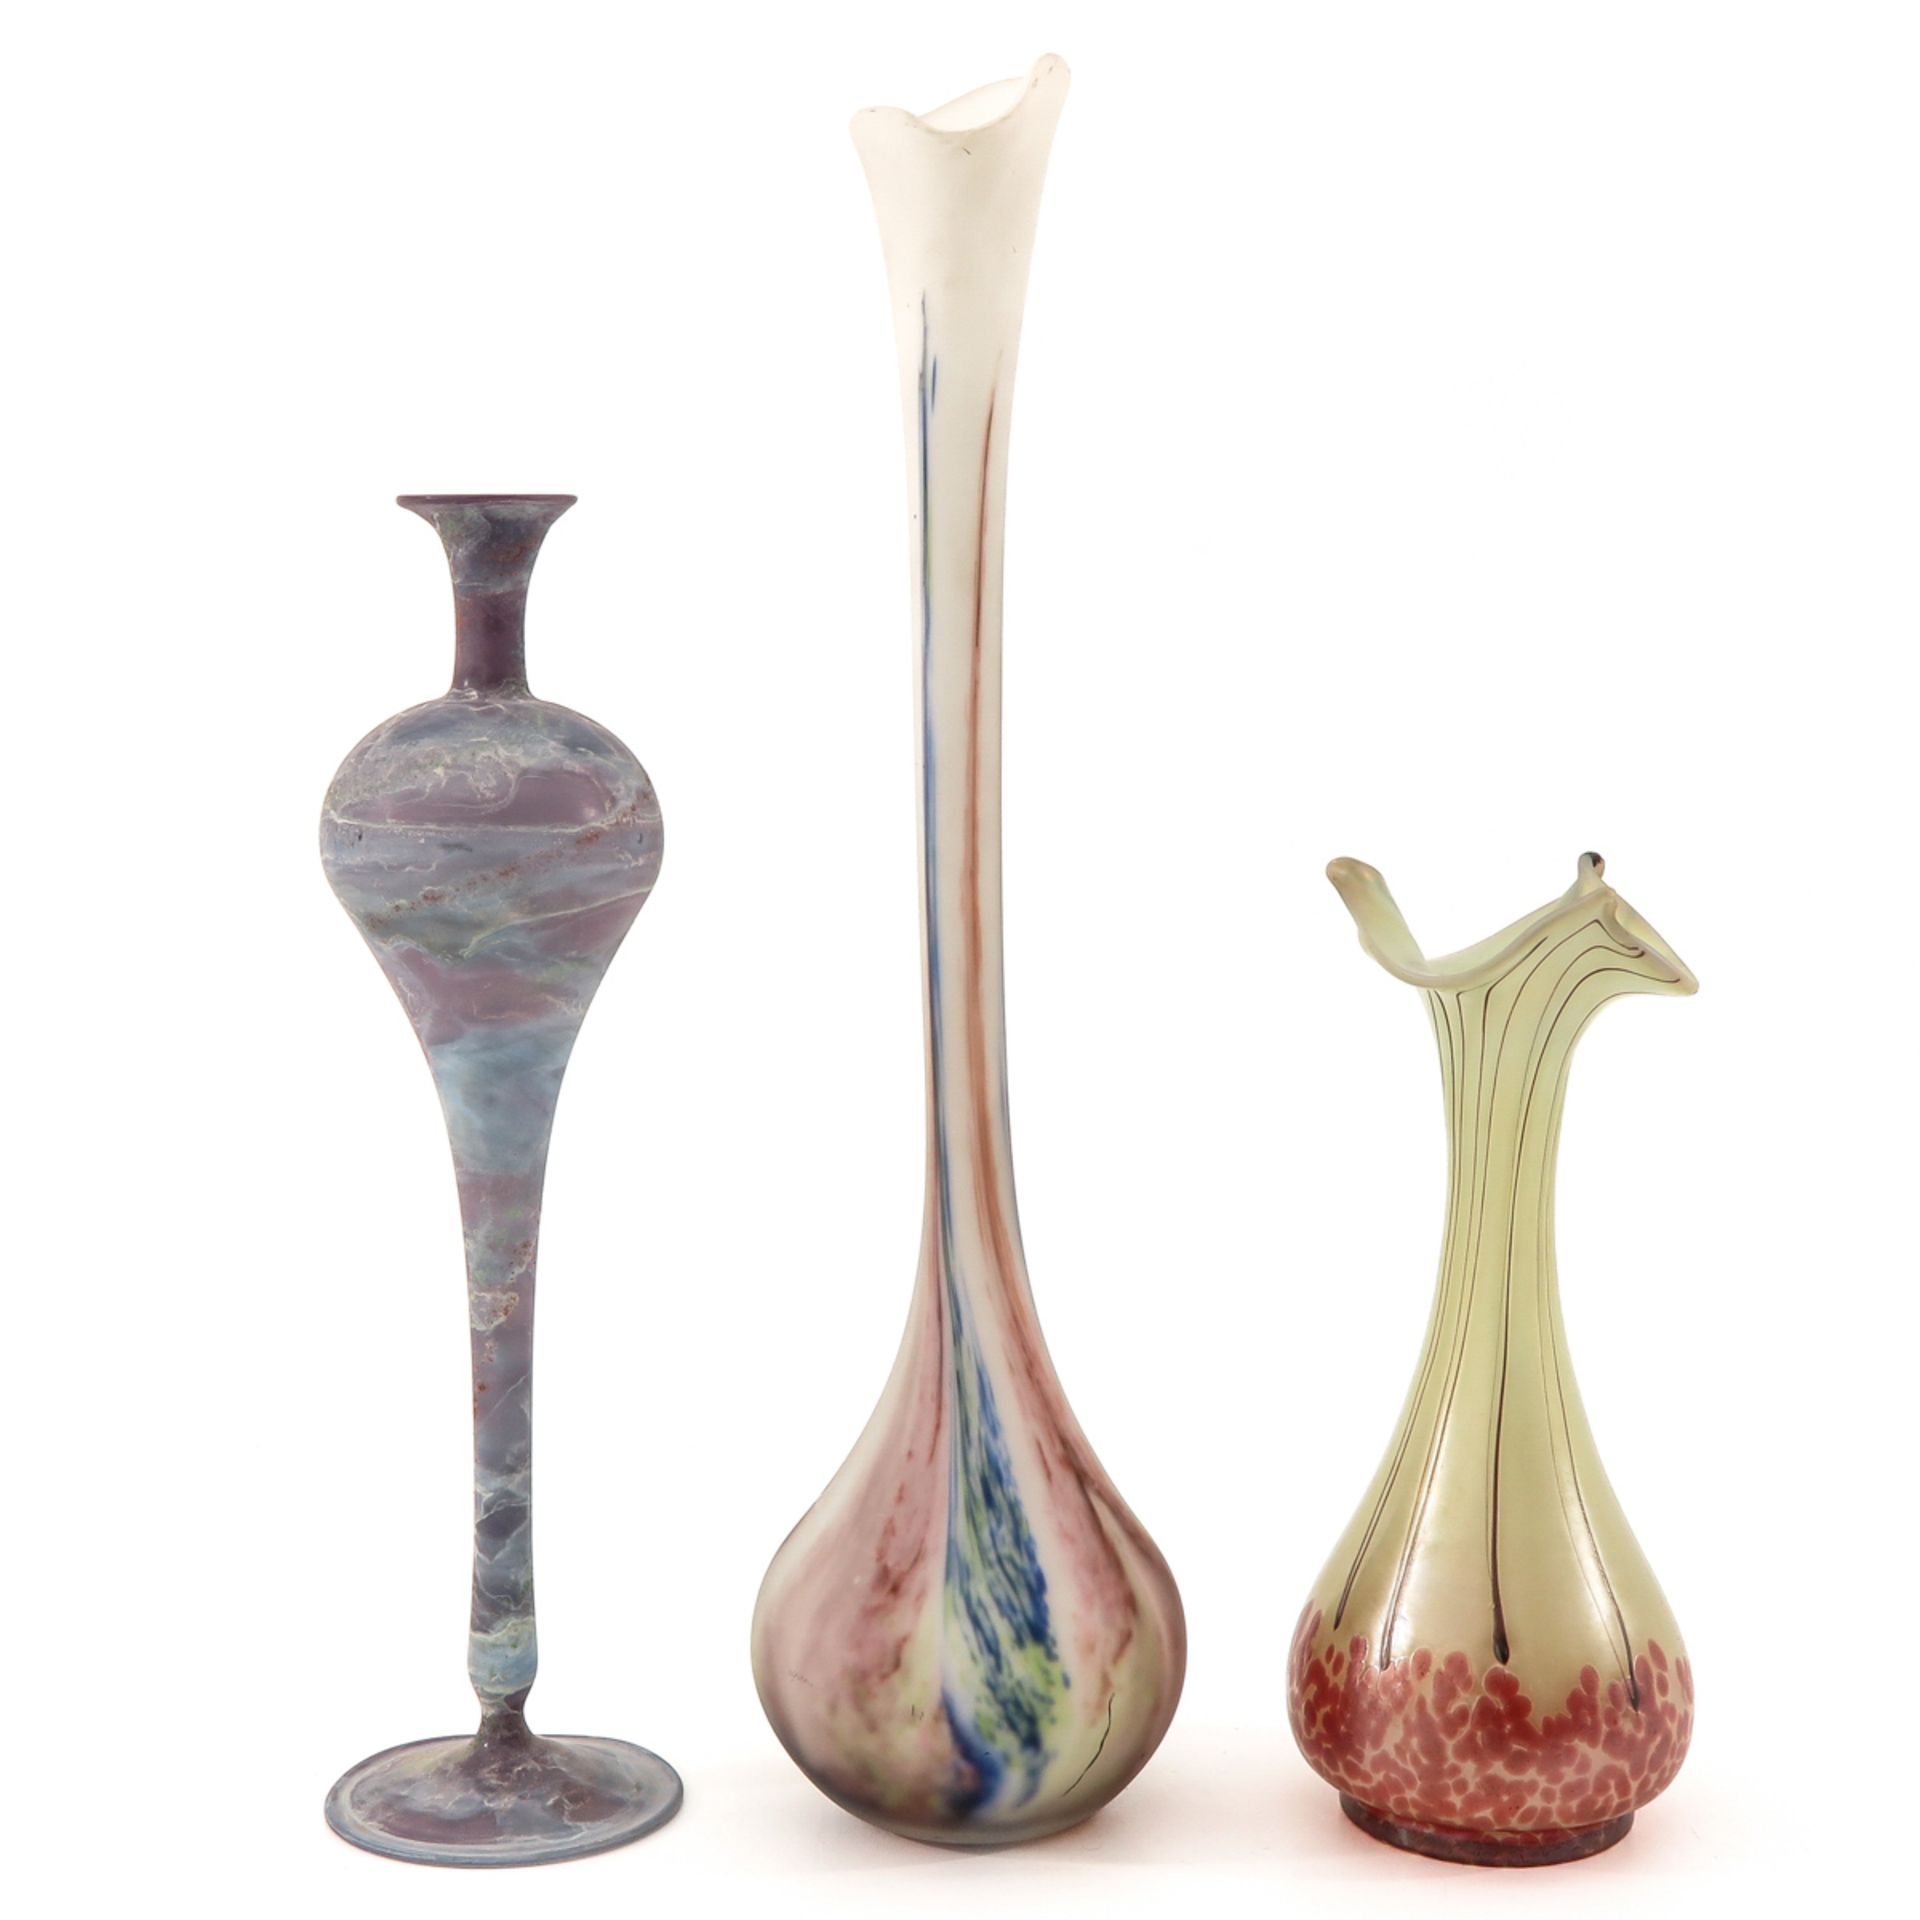 A Collection of 3 Vases - Image 4 of 10